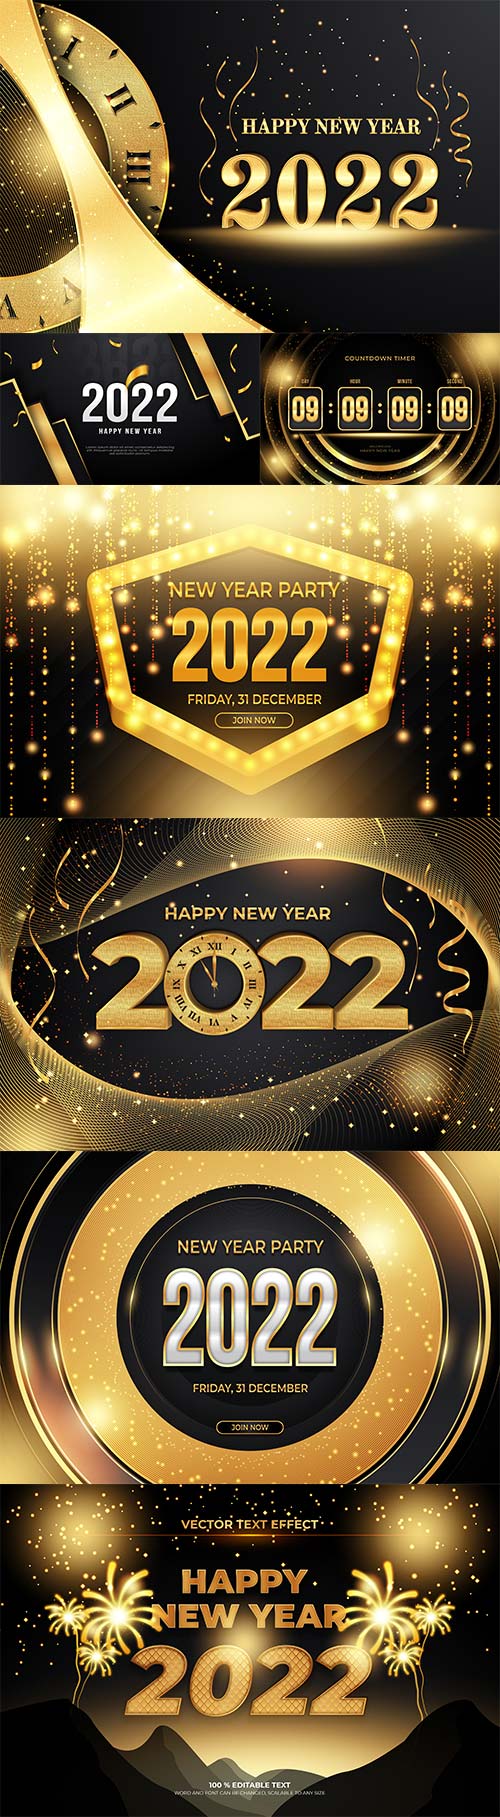 Happy new year editable text effect with black gold backround style premium vector